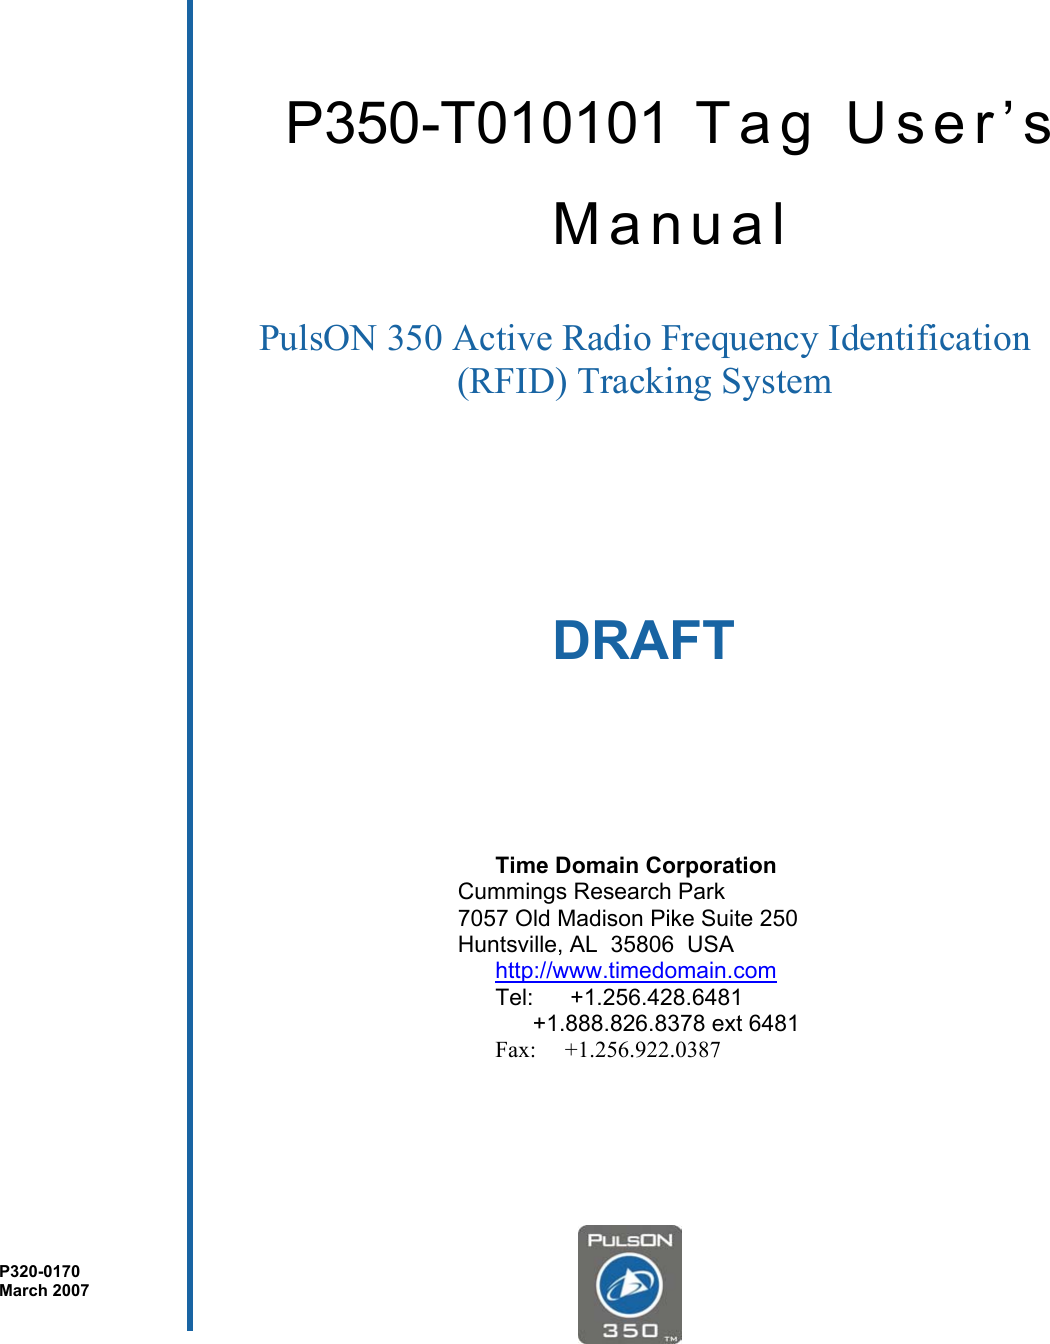                           DRAFT        P350-T010101 Tag User’s Manual PulsON 350 Active Radio Frequency Identification (RFID) Tracking System  Time Domain Corporation   Cummings Research Park   7057 Old Madison Pike Suite 250   Huntsville, AL  35806  USA http://www.timedomain.com Tel:   +1.256.428.6481   +1.888.826.8378 ext 6481 Fax:     +1.256.922.0387 P320-0170 March 2007 